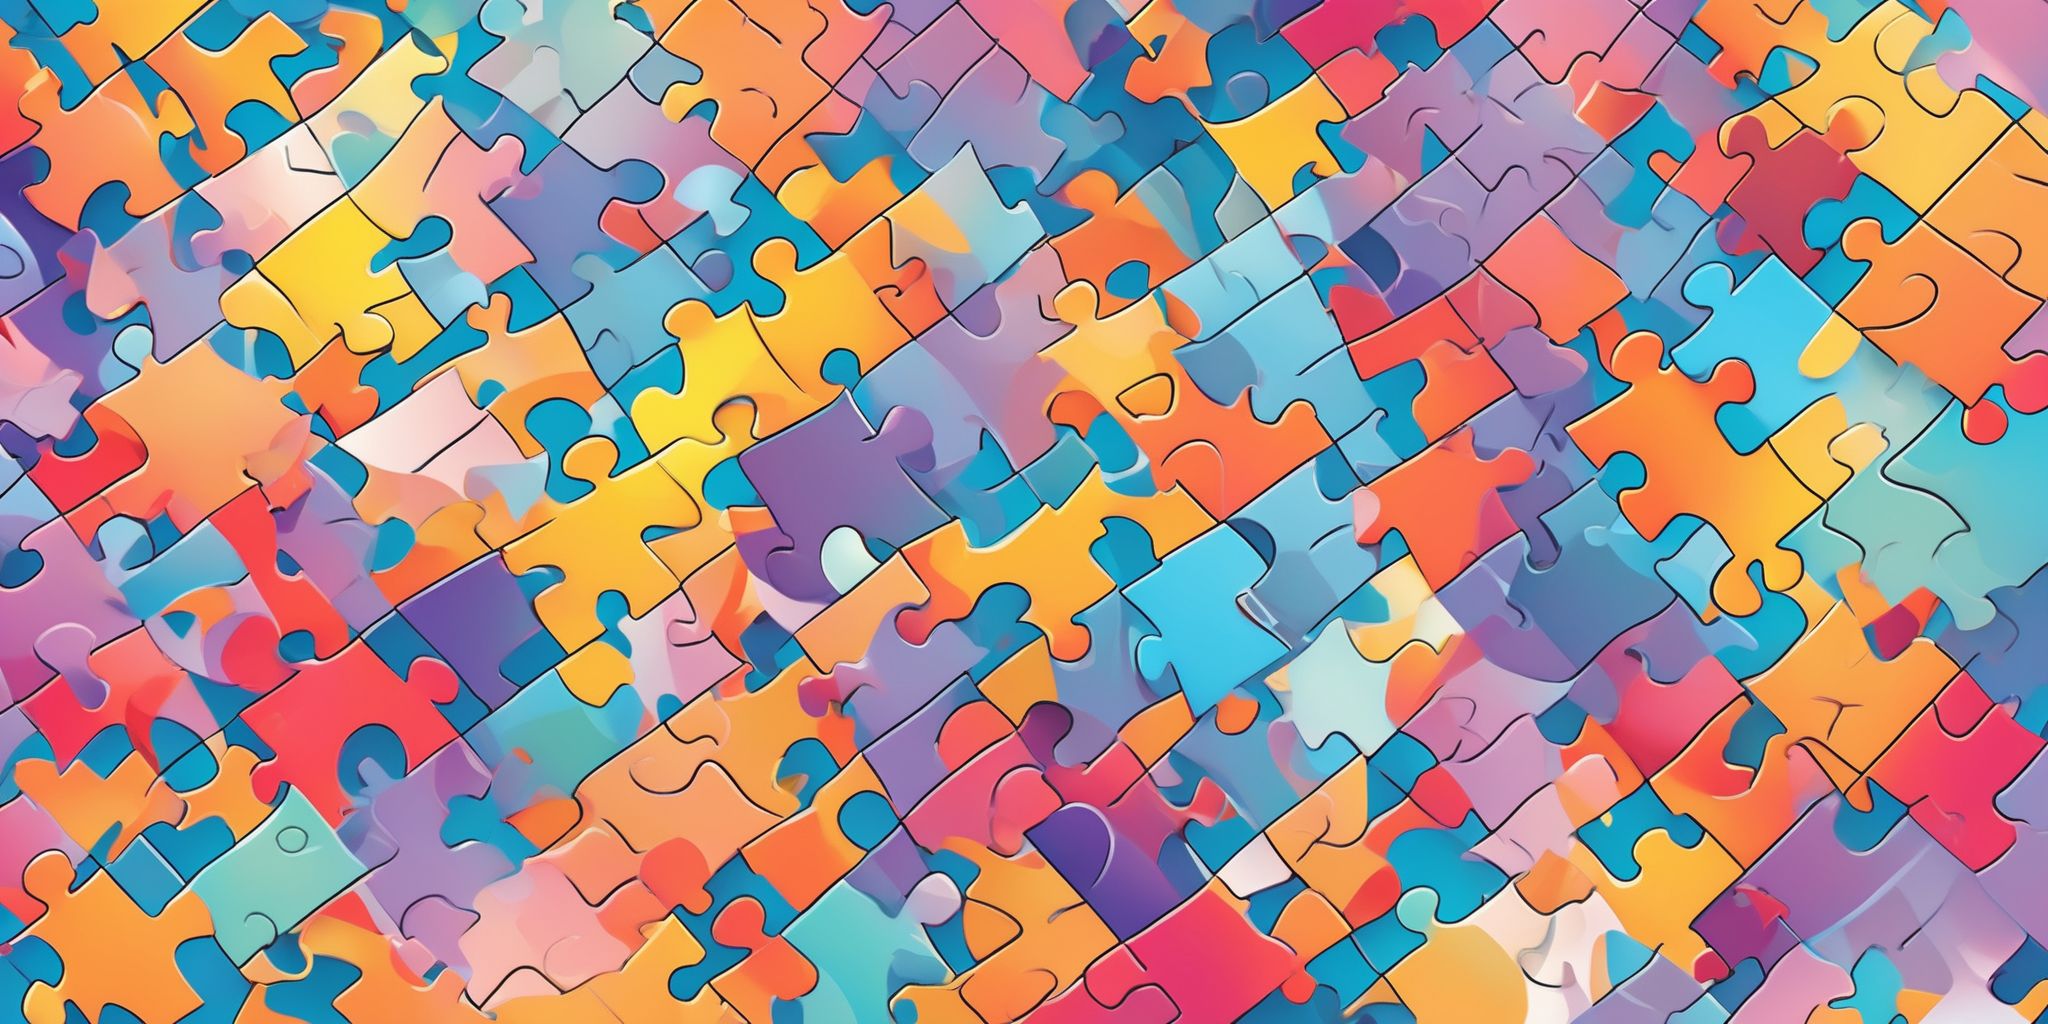 Puzzle in illustration style with gradients and white background